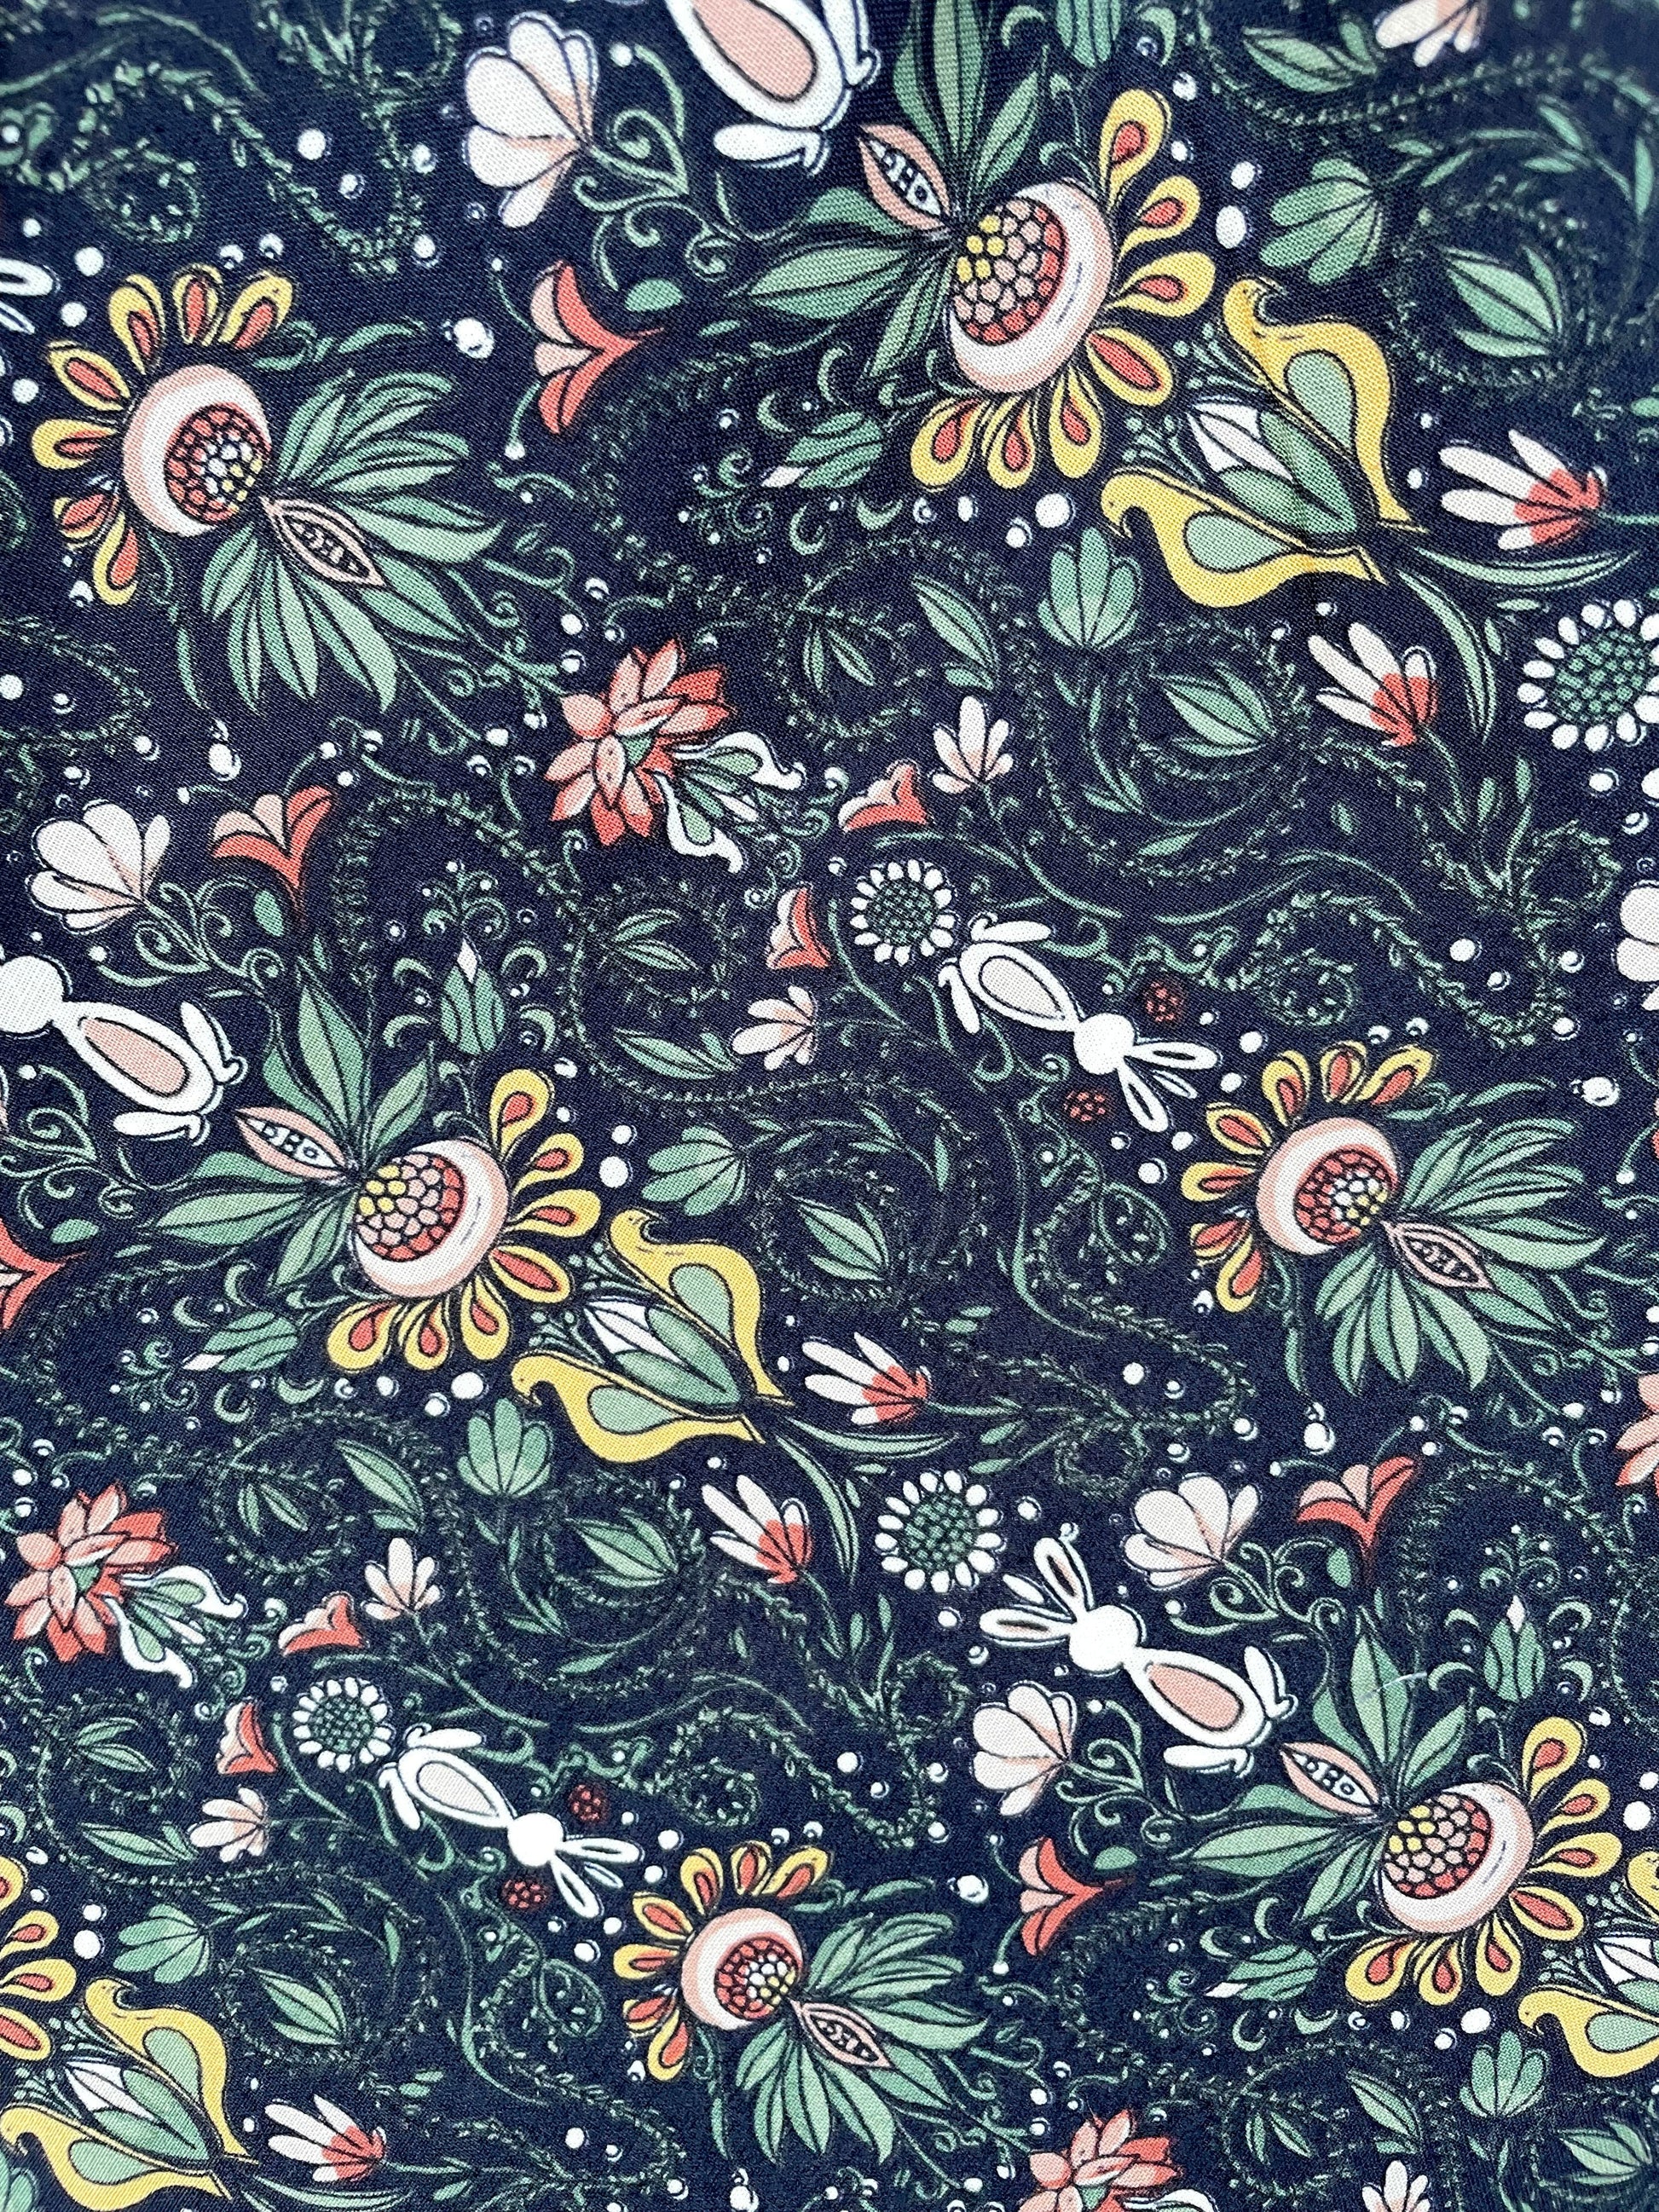 a close up of the fabric for the Rabbit Midi dress